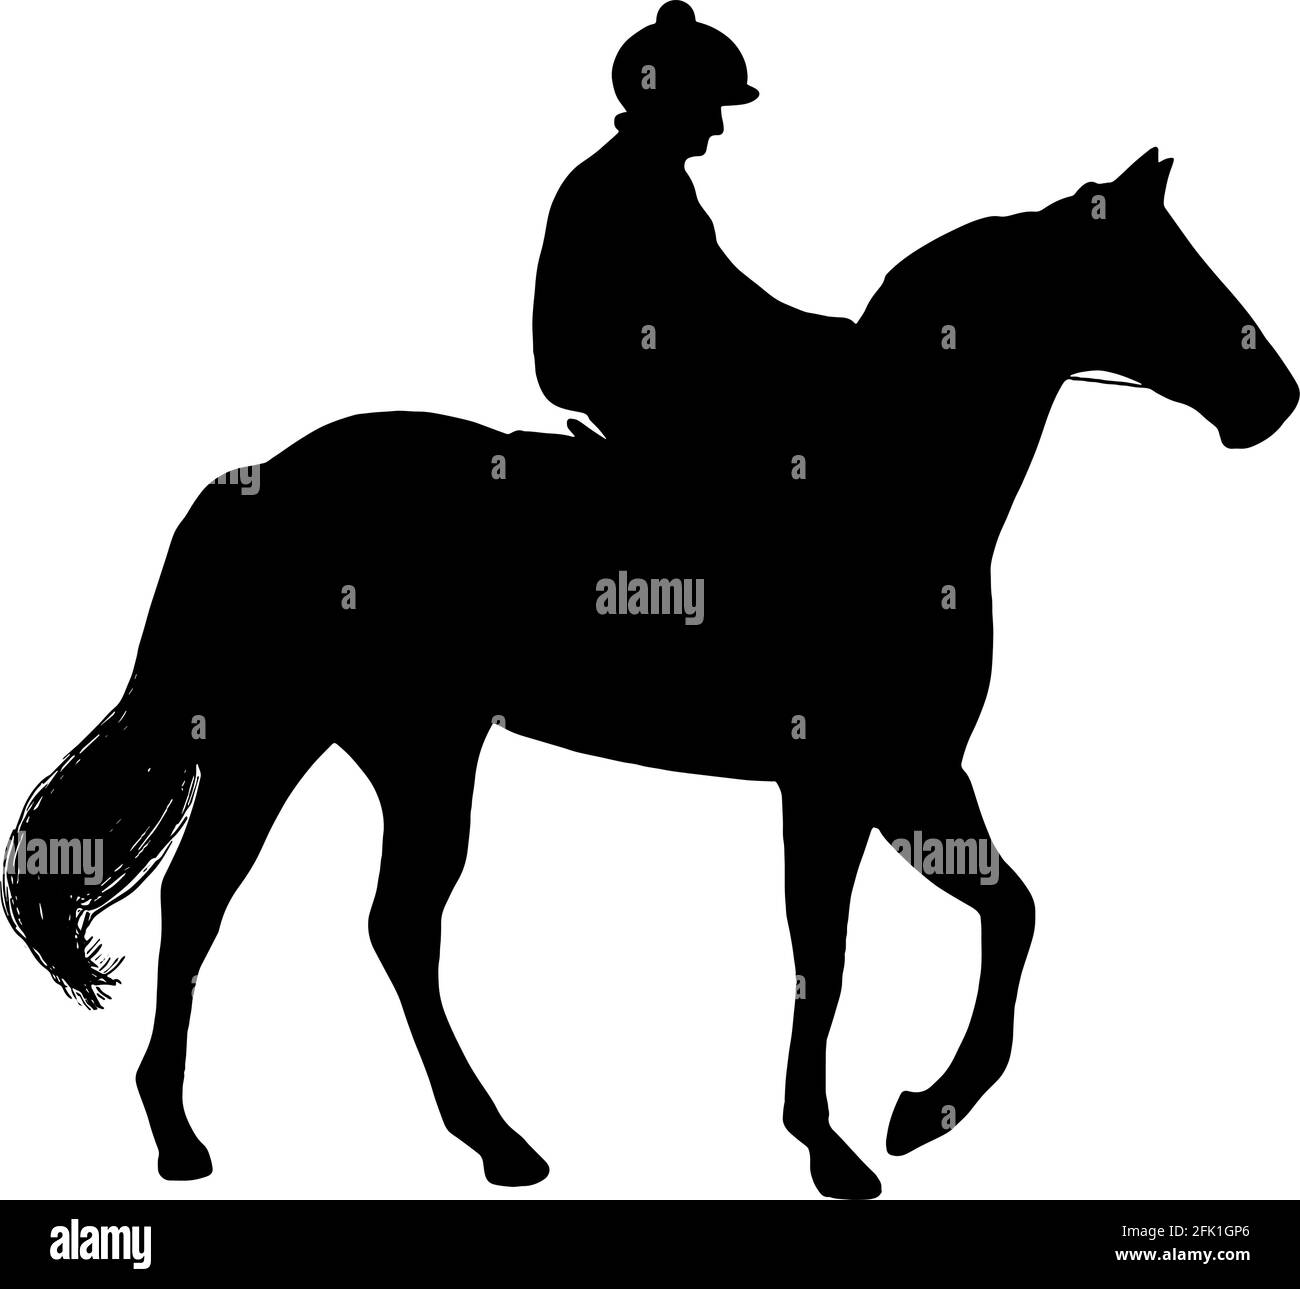 Racehorse and jockey silhouette Stock Vector